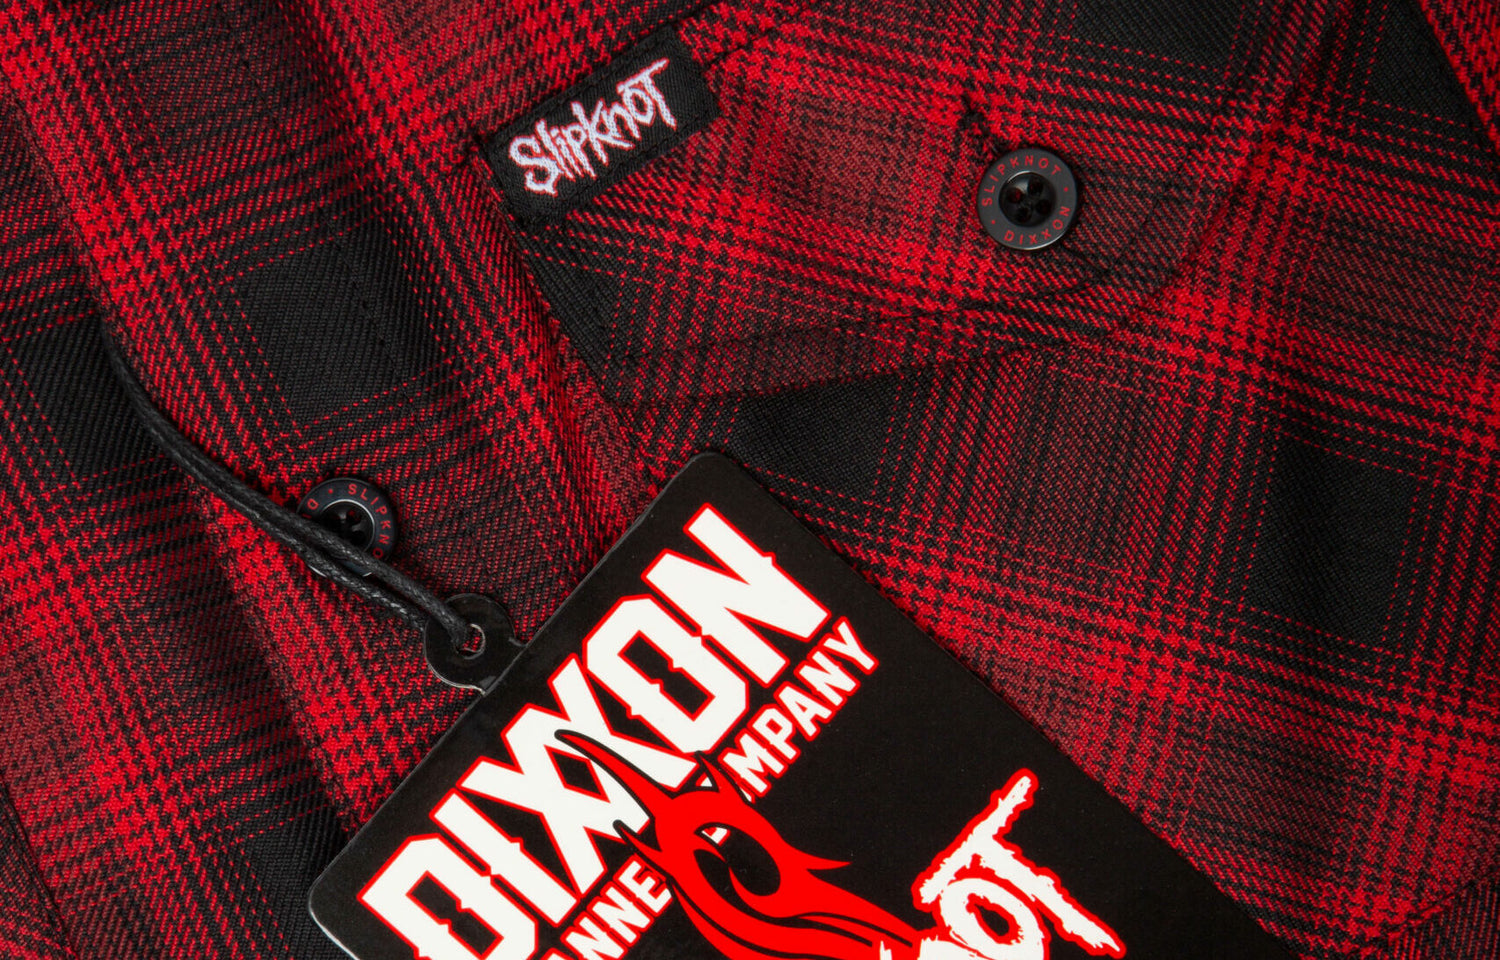 Slipknot launches collaboration with Dixxon Flannel Company